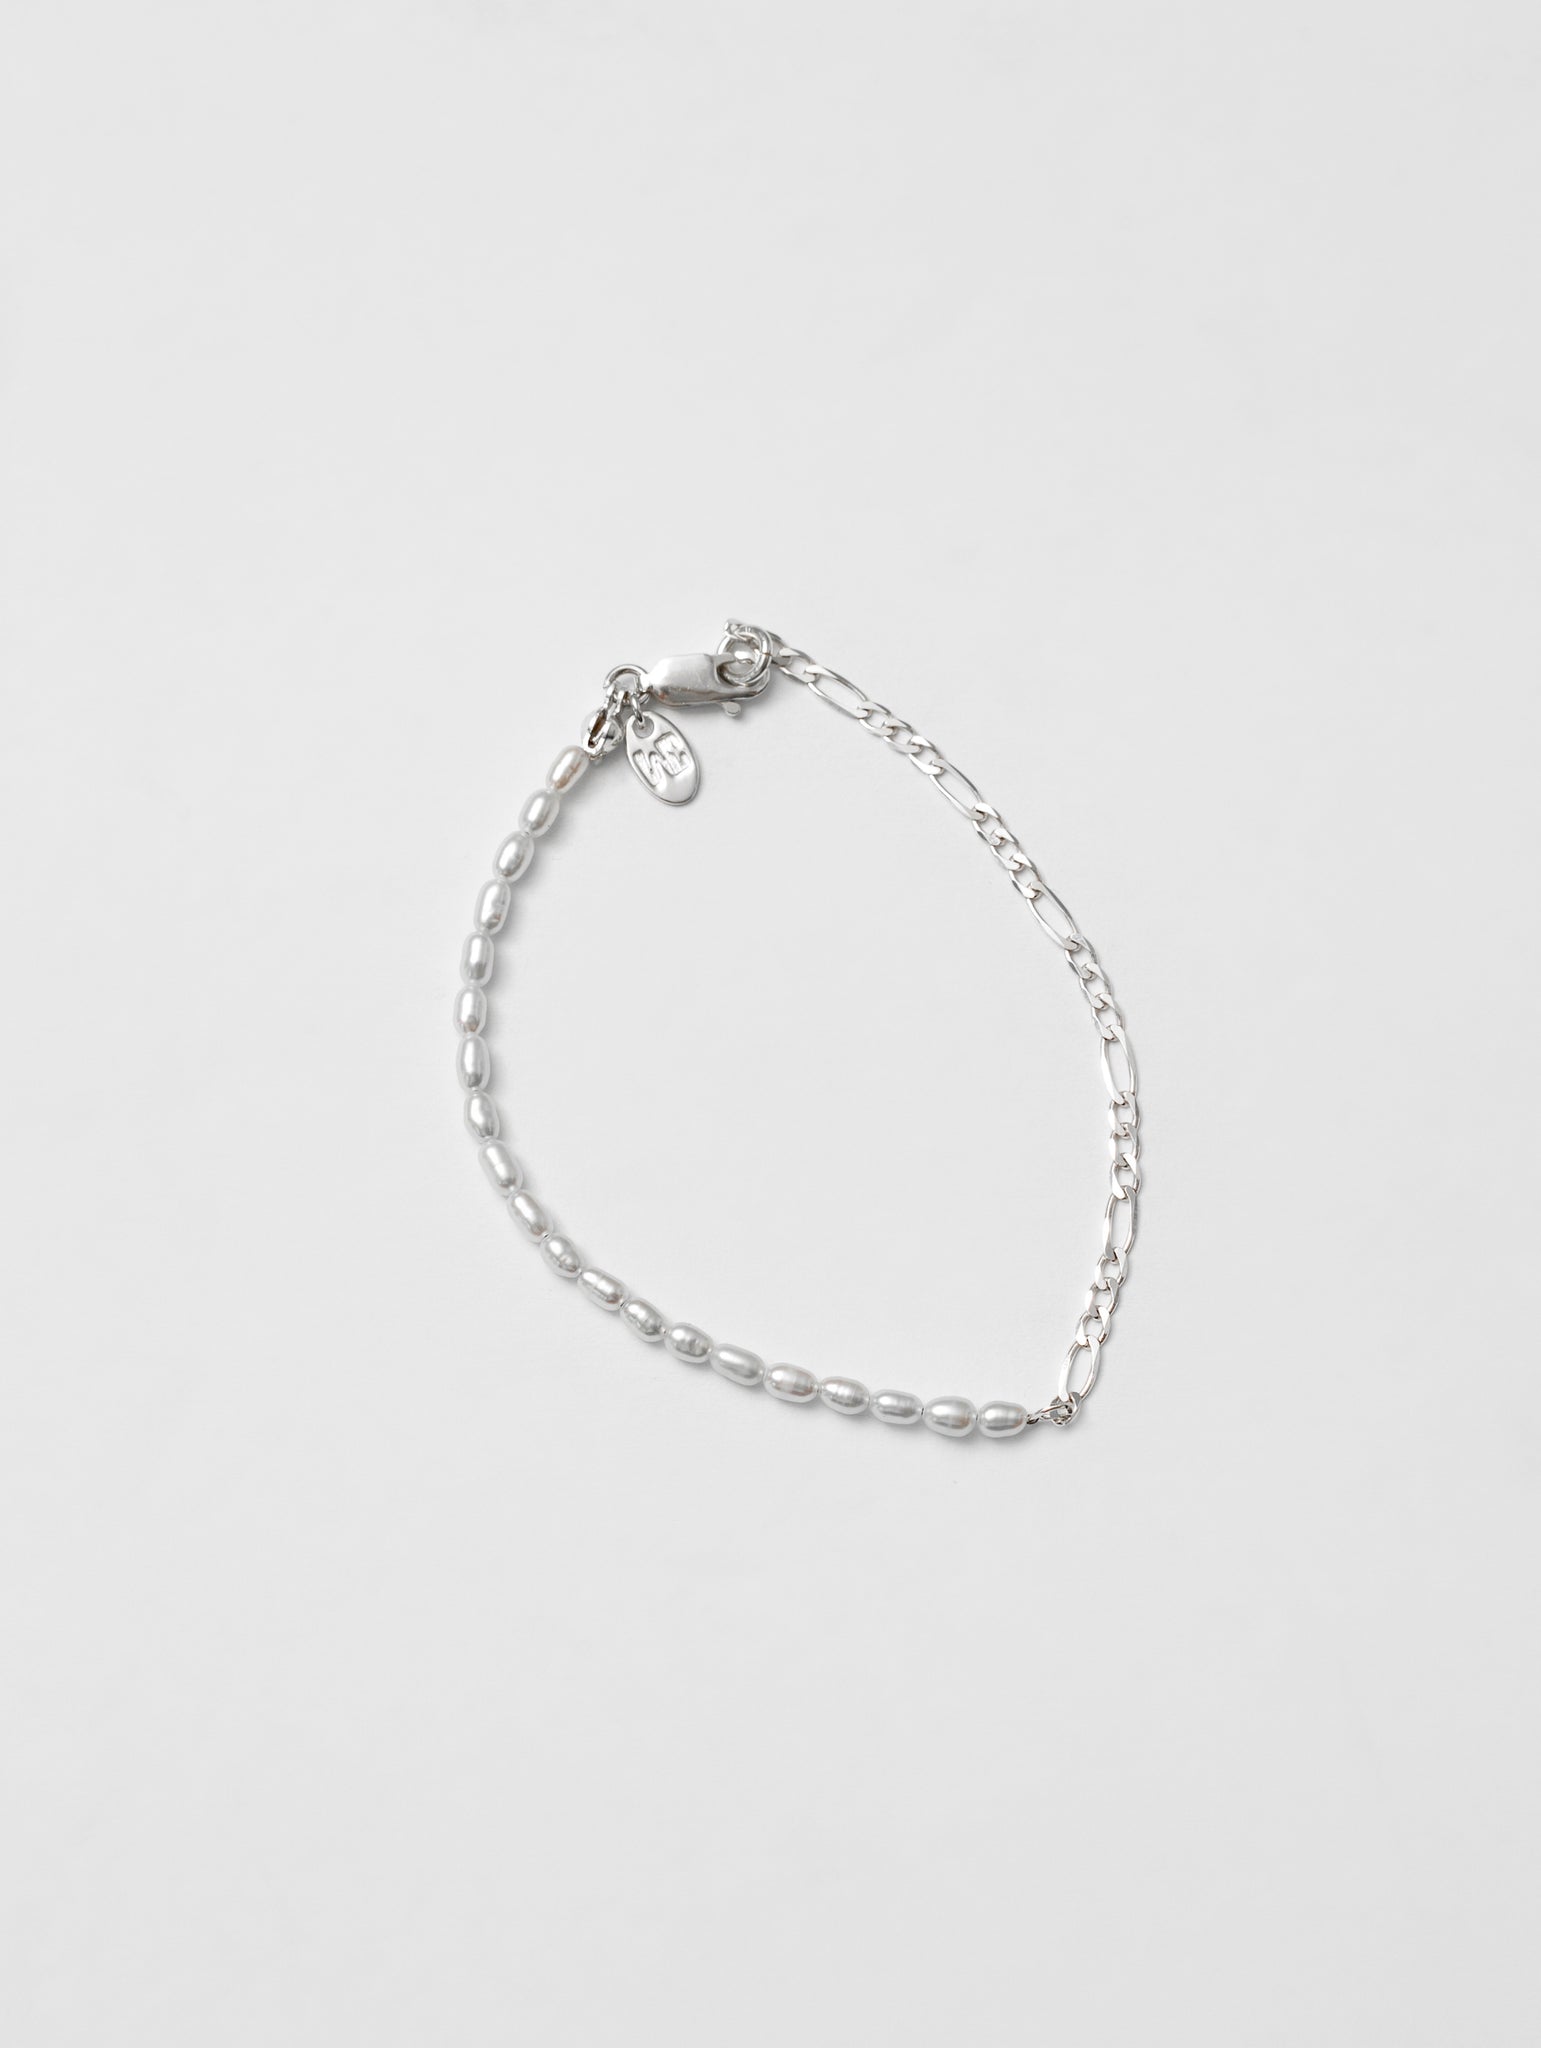 Wolf Circus Minature Pearl Figaro Chain Combination Bracelet 925 Sterling Silver | Mara Bracelet in Sterling Silver-Bracelets-7"-wolfcircus.com